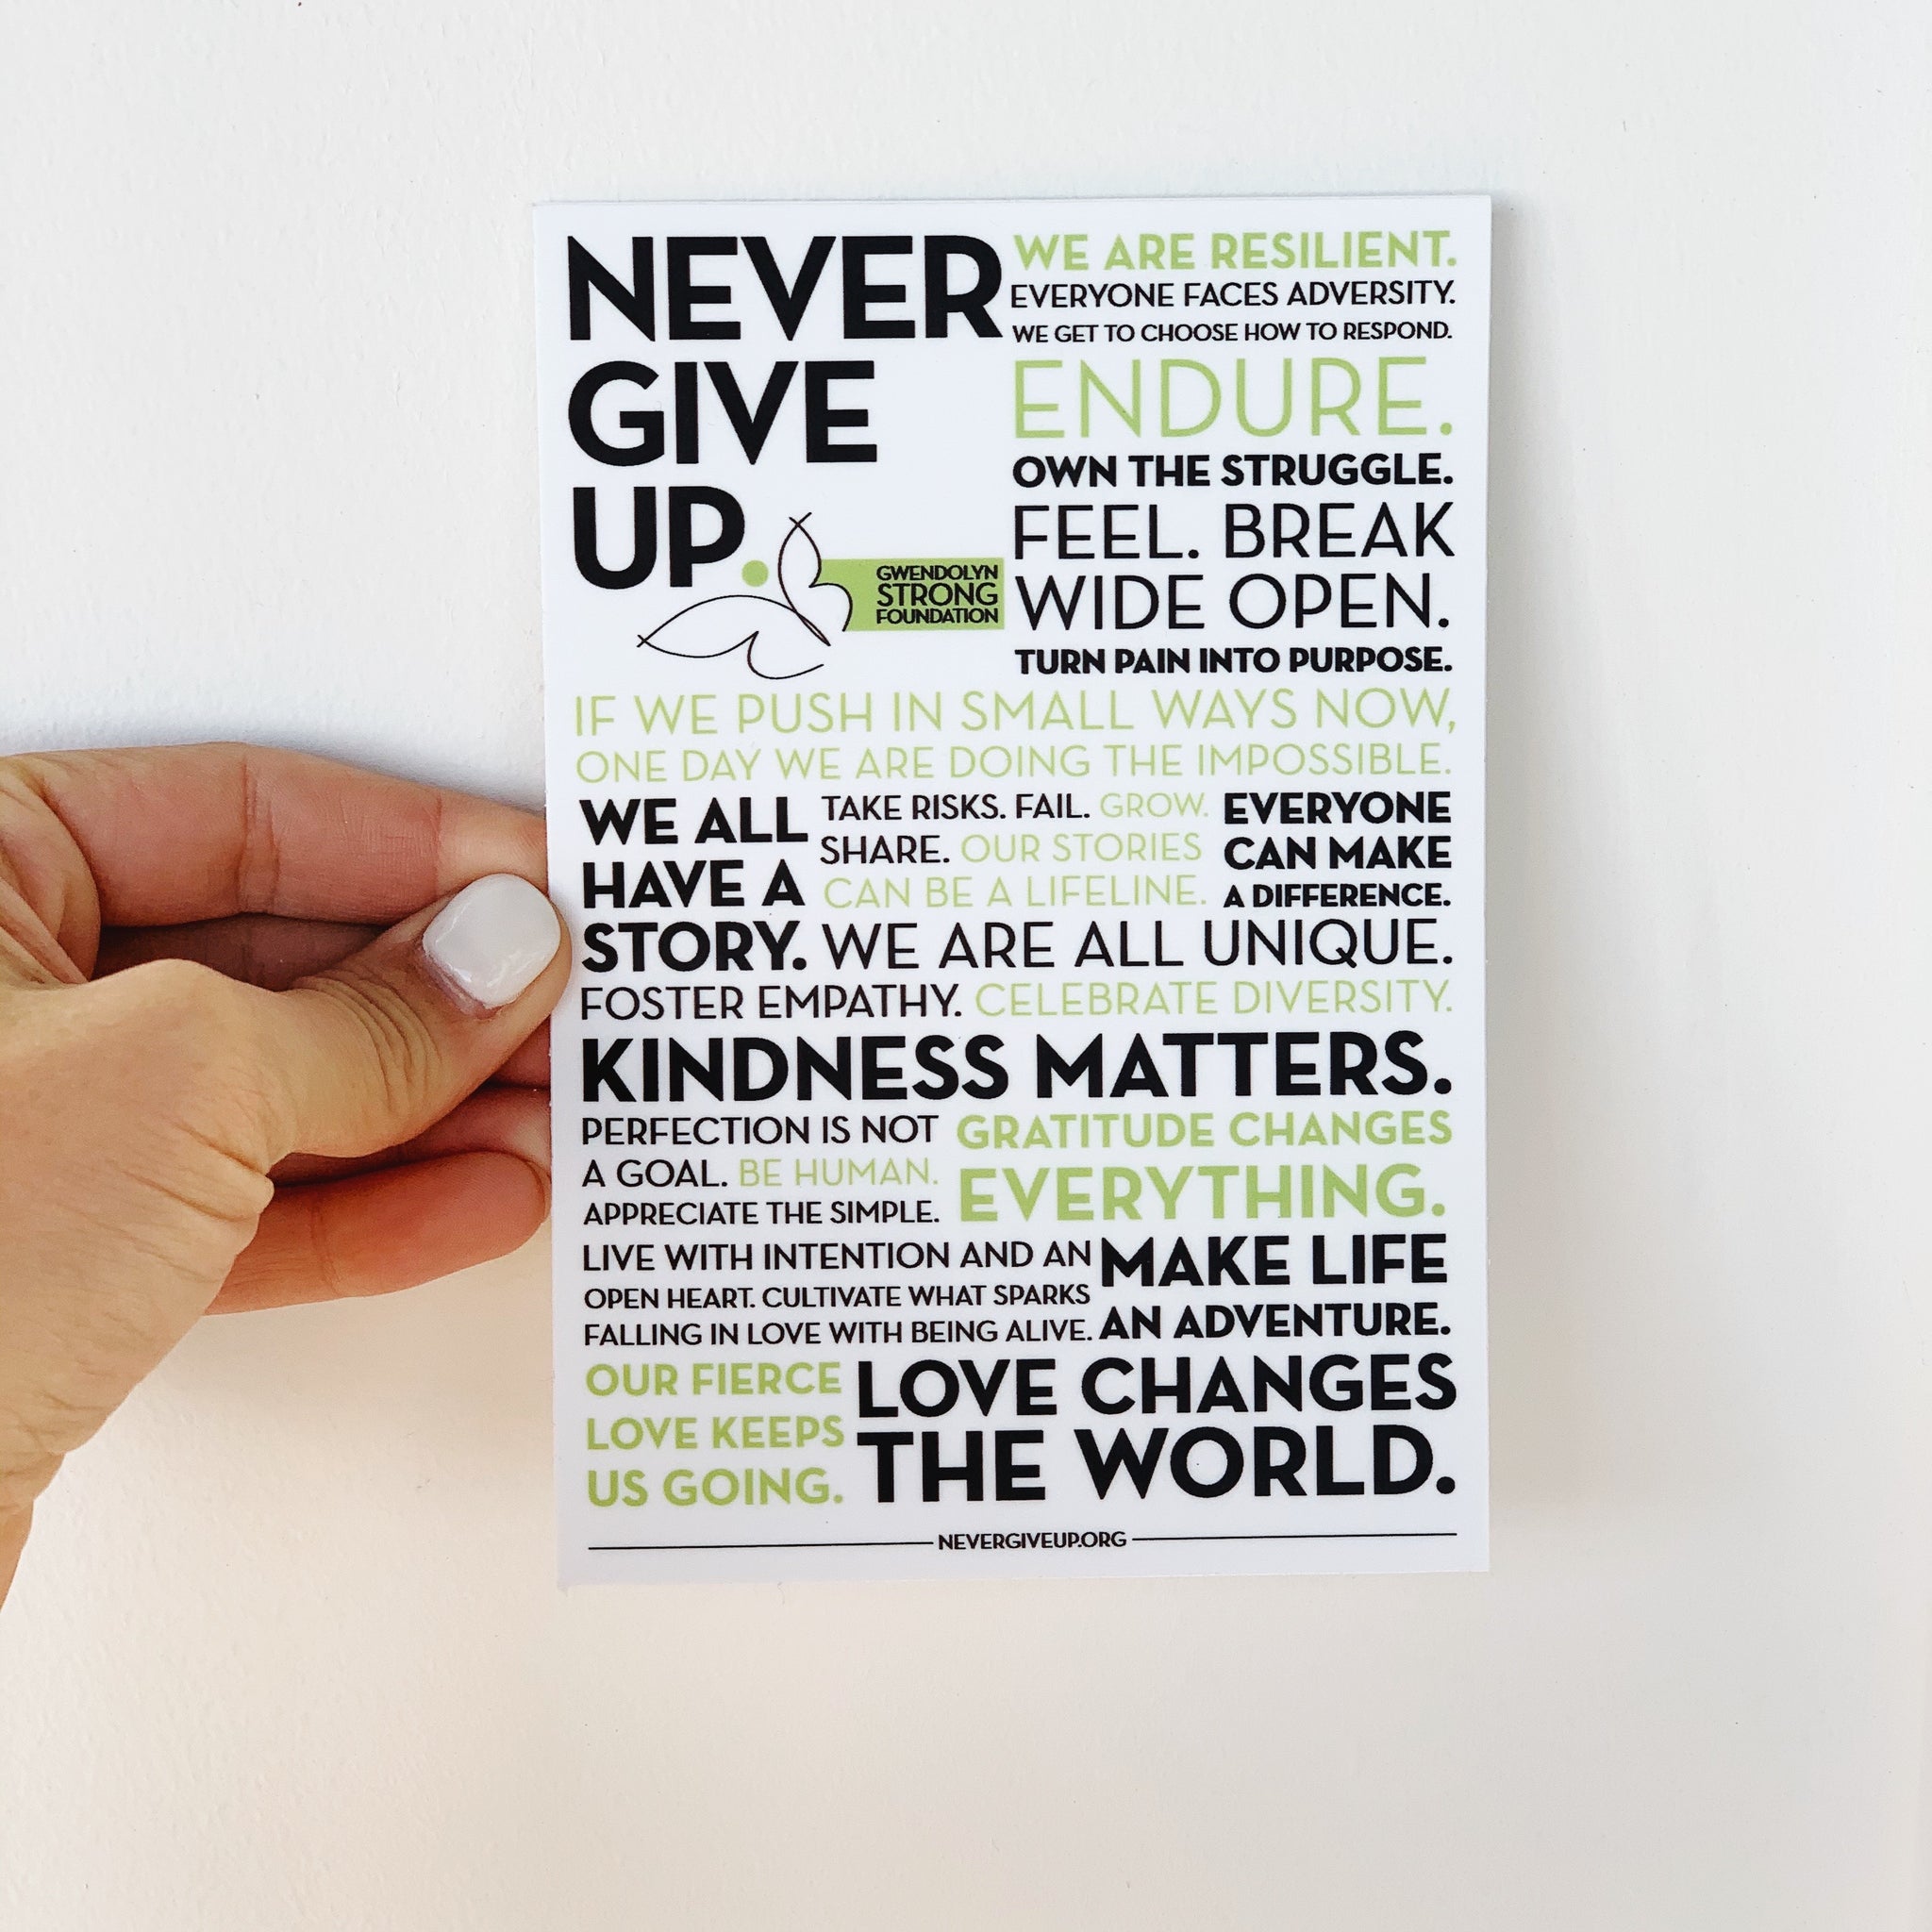 NEVER GIVE UP. MANTRA STICKER